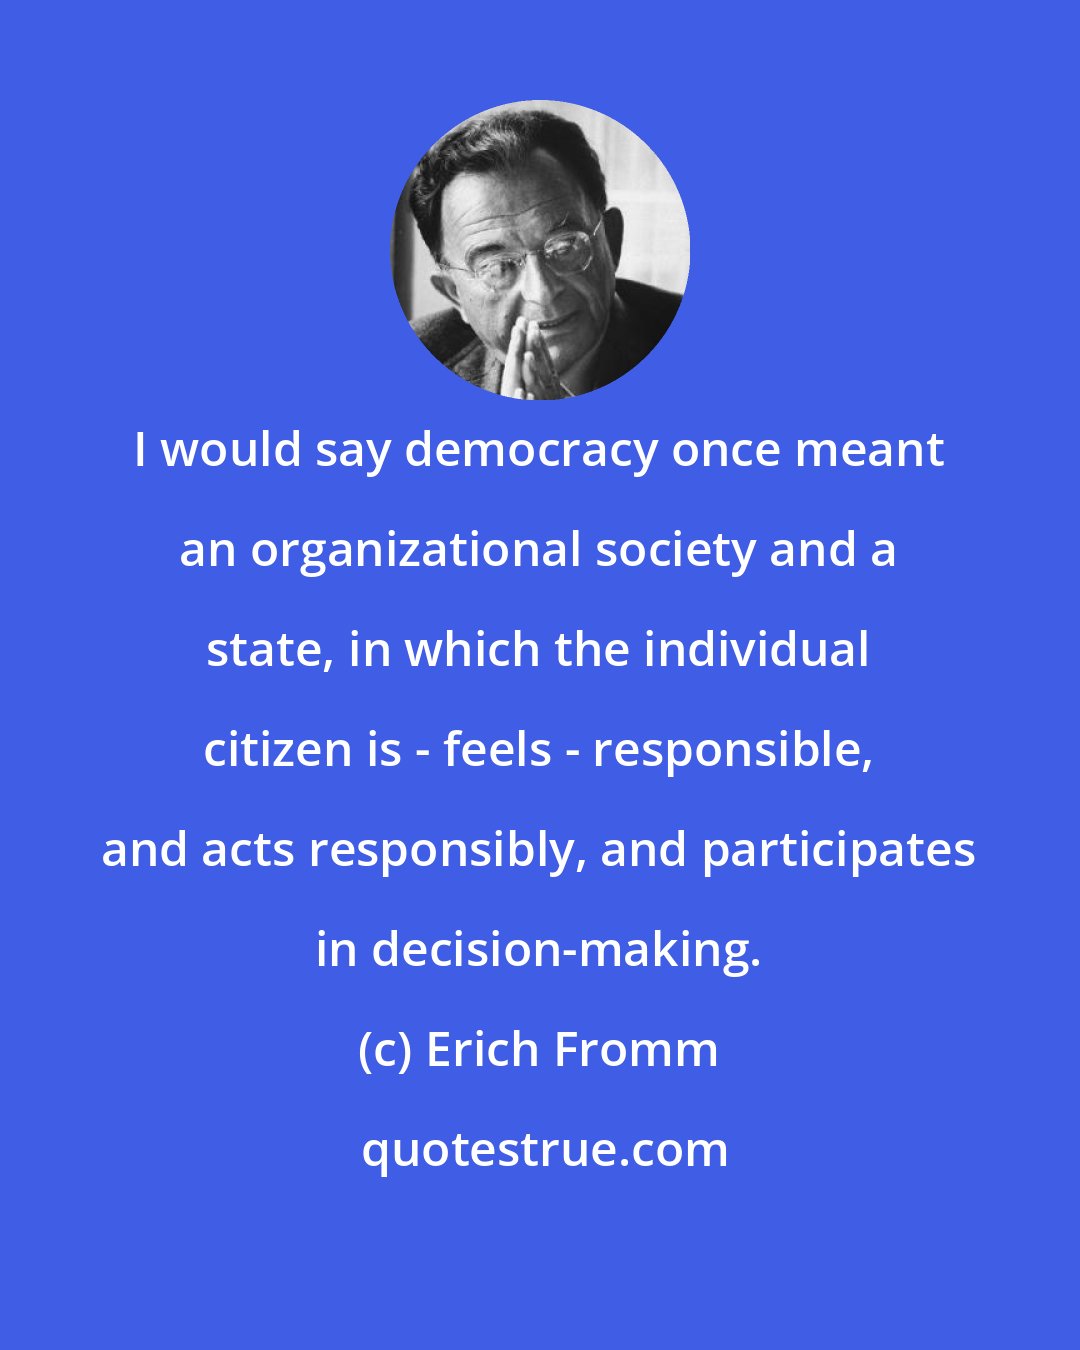 Erich Fromm: I would say democracy once meant an organizational society and a state, in which the individual citizen is - feels - responsible, and acts responsibly, and participates in decision-making.